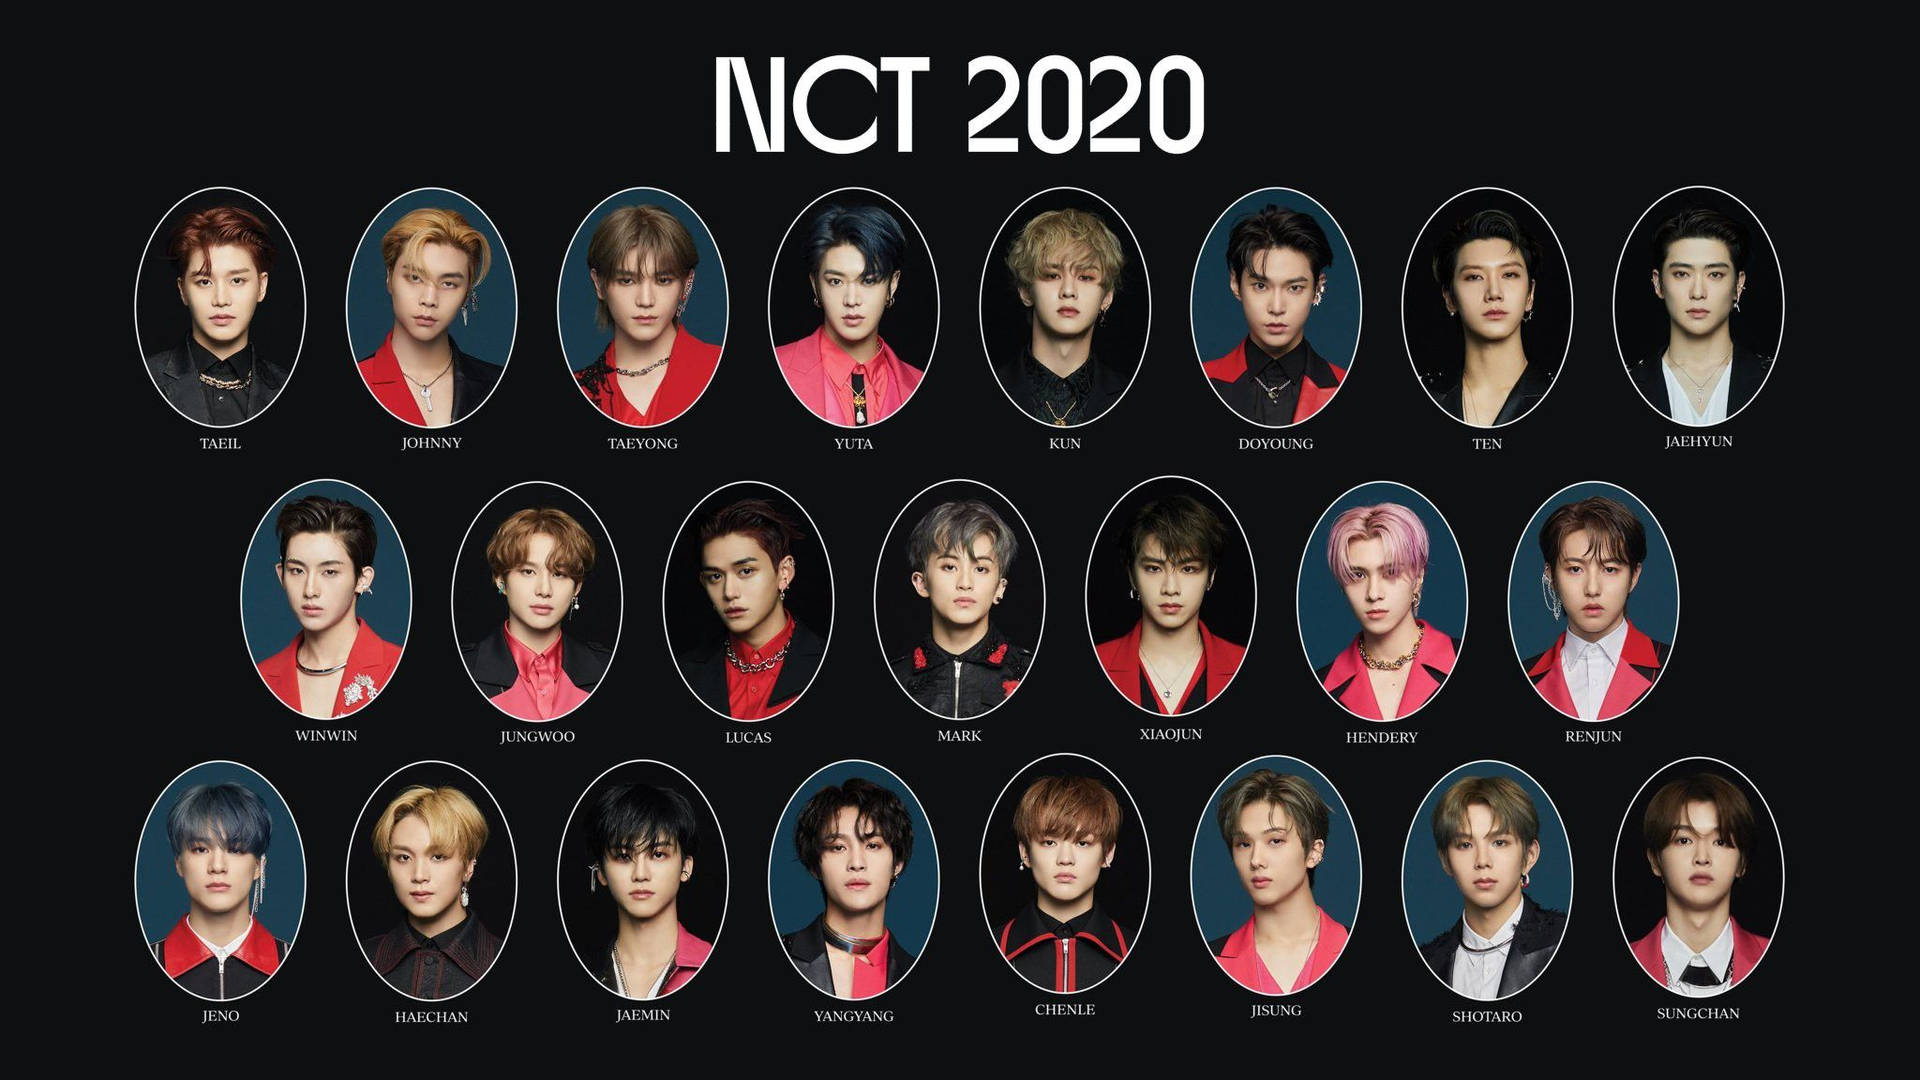 Nct 2020 Hd Wallpapers